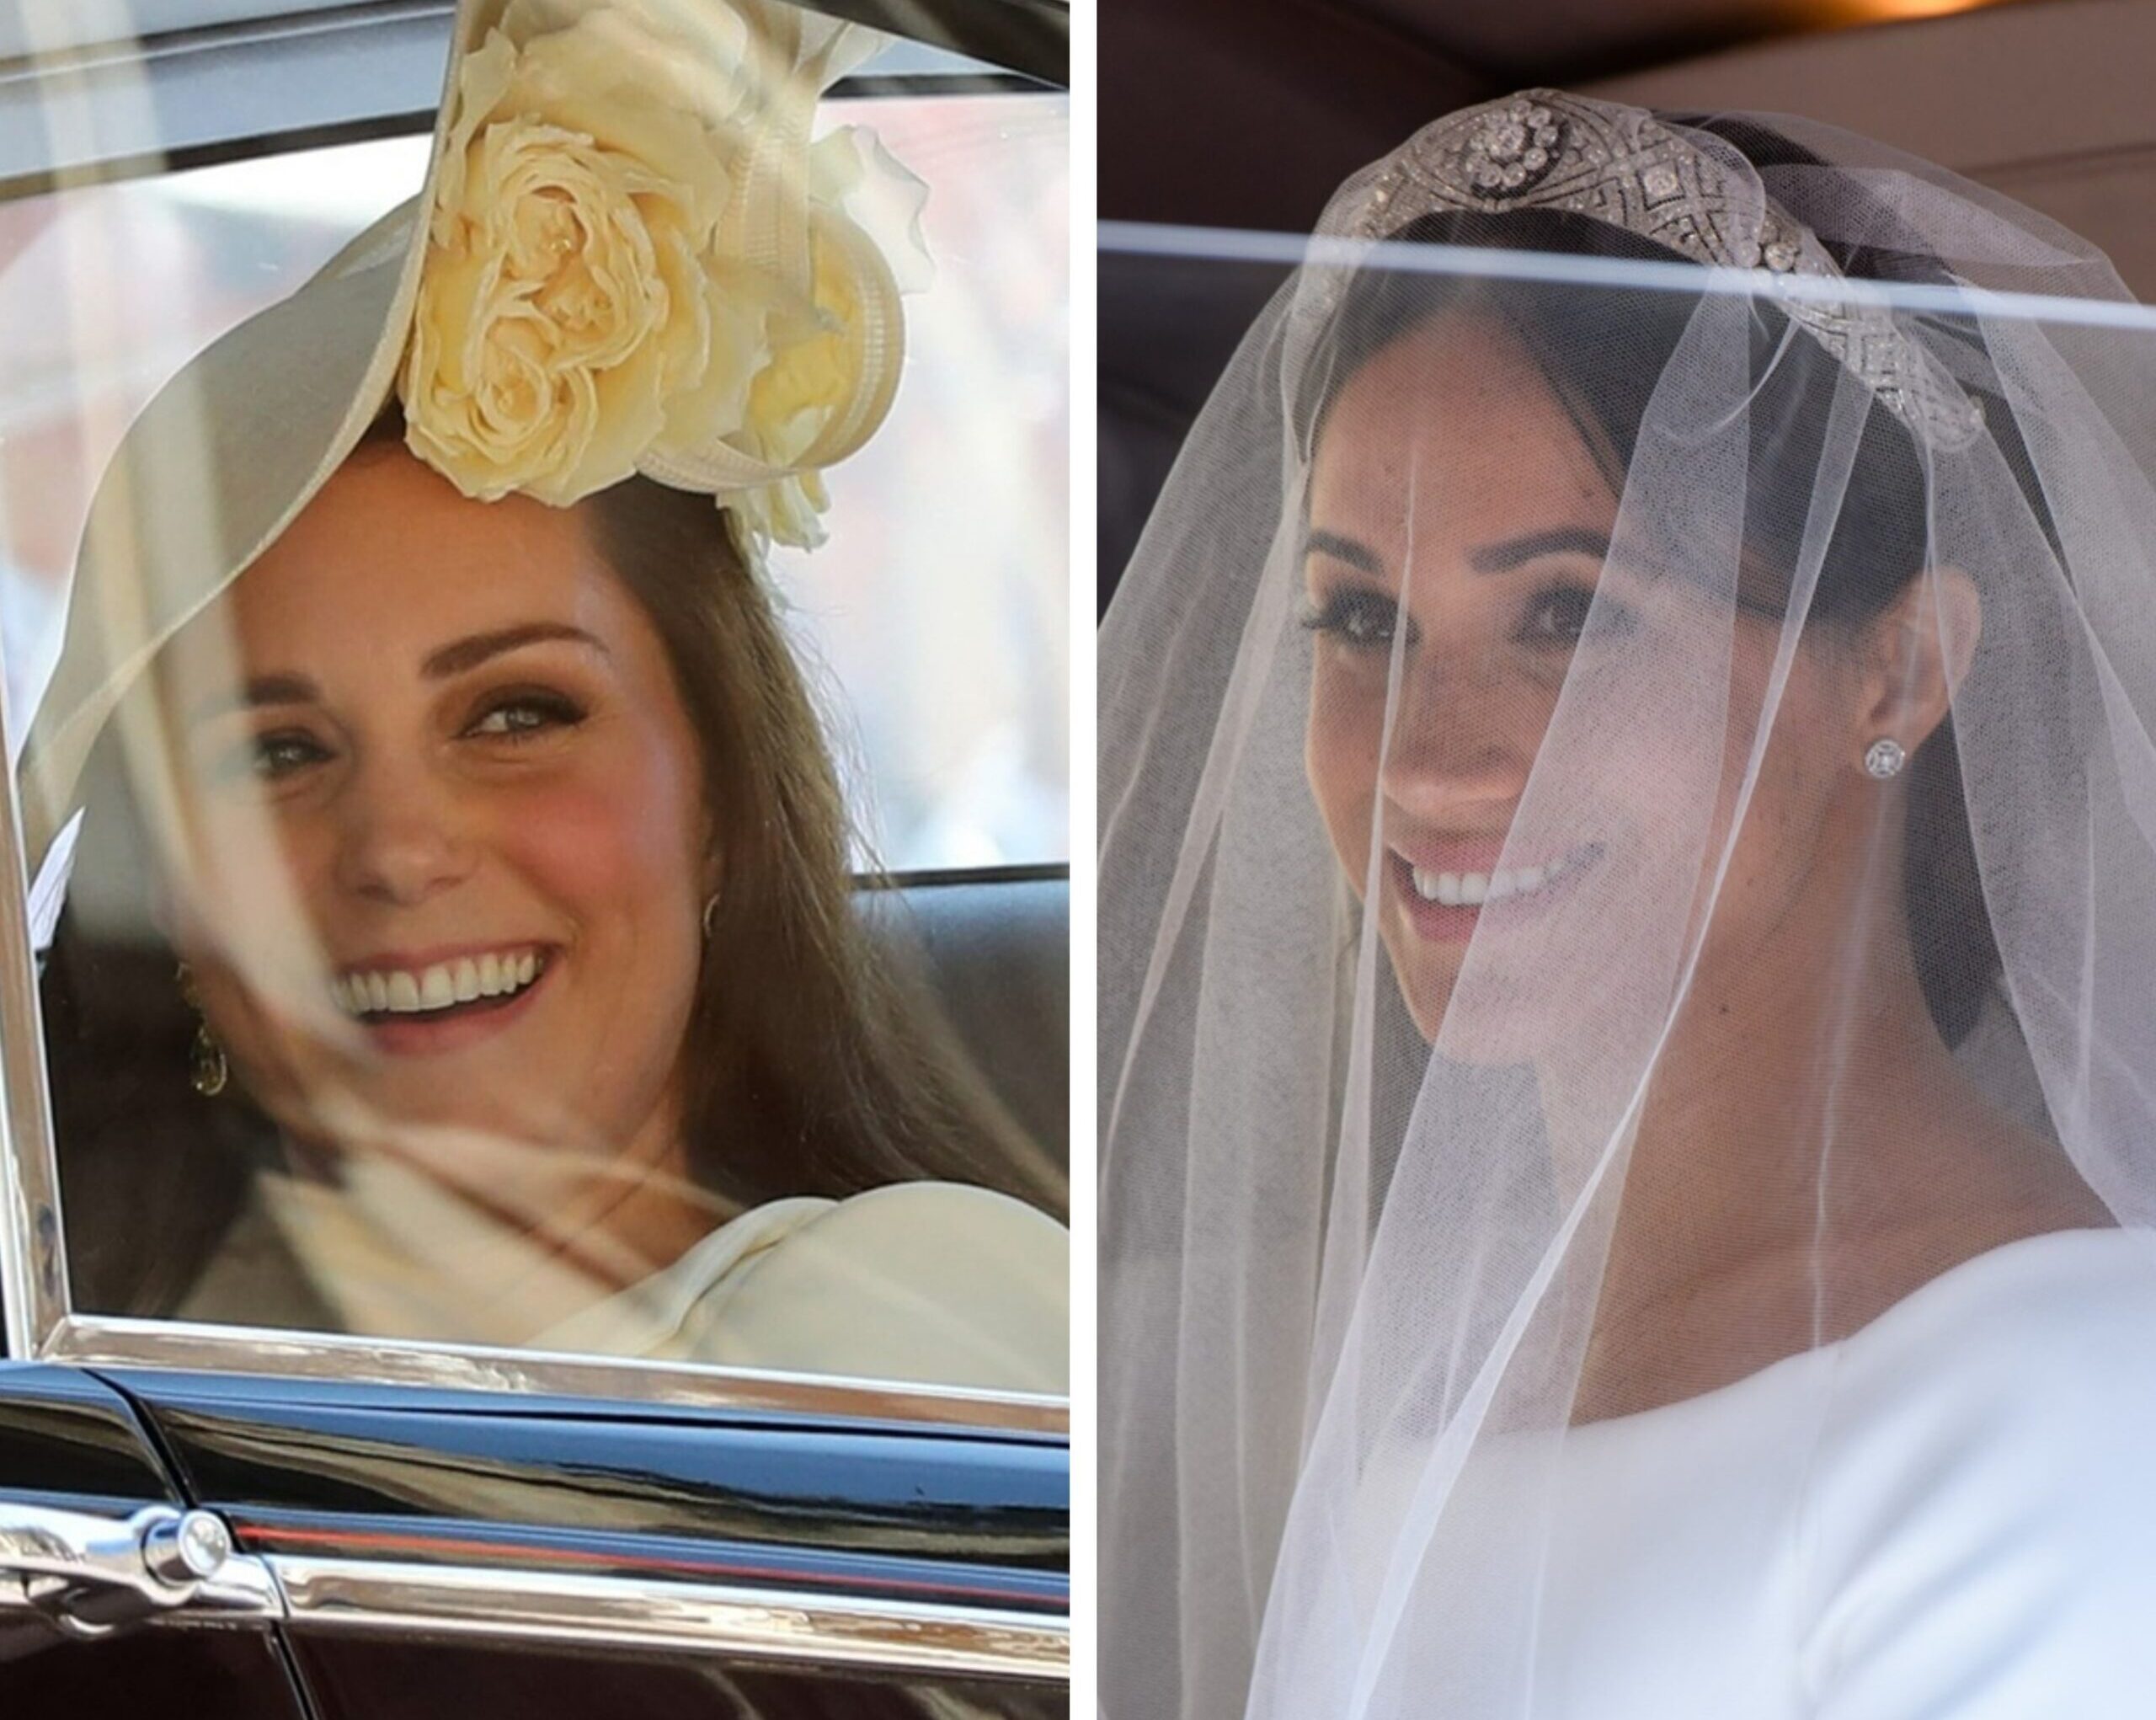 (L) Kate Middleton leaving Prince Harry and Meghan Markle's wedding, (R) Meghan Markle arriving at her wedding to Prince Harry